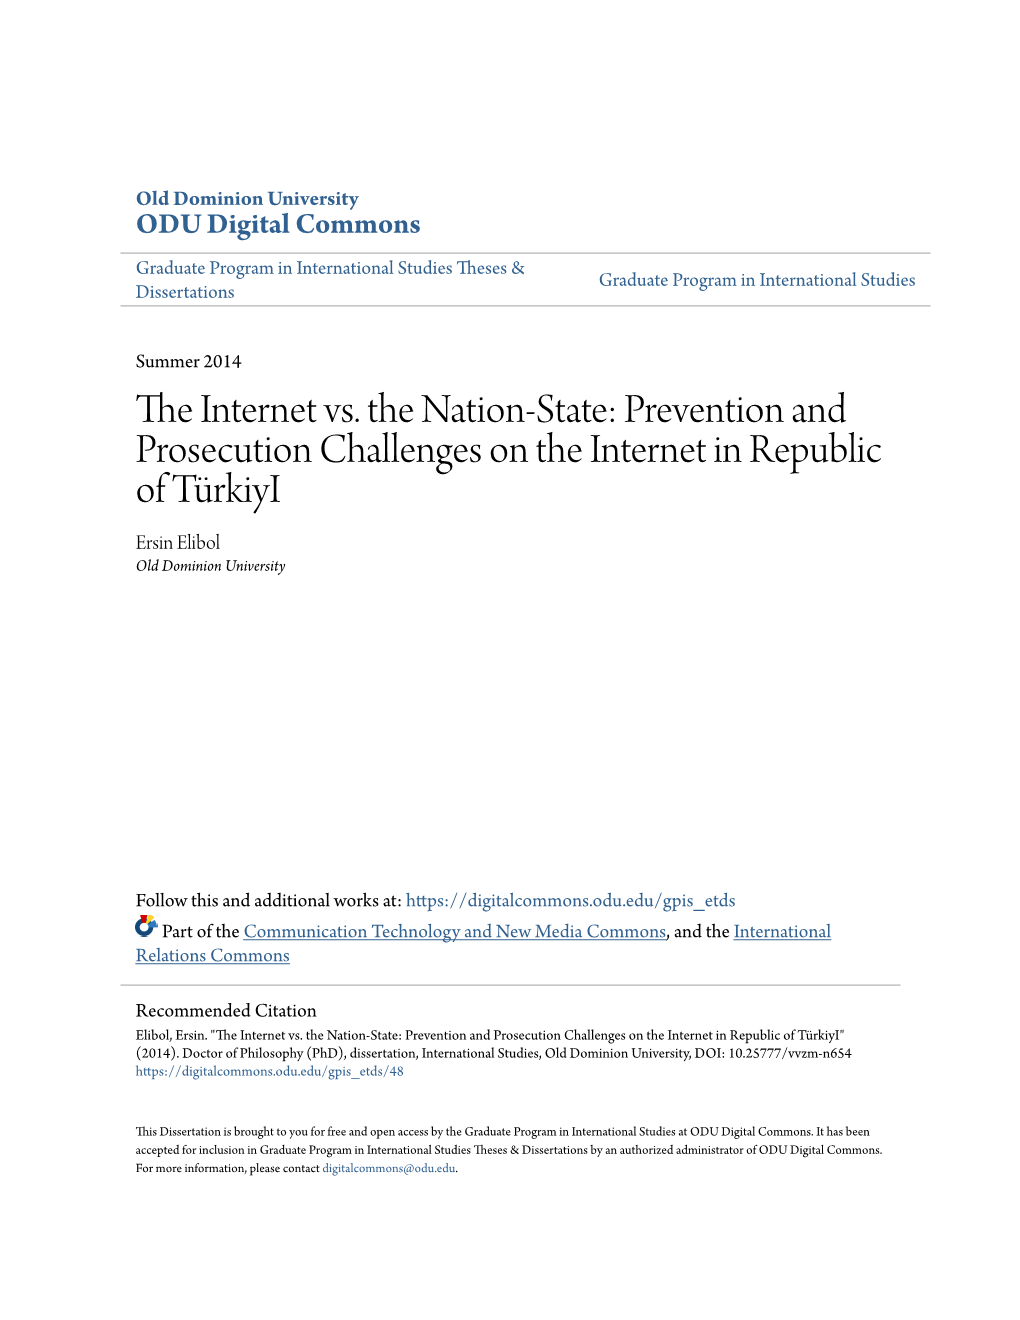 Prevention and Prosecution Challenges on the Internet in Republic of Türkiyi Ersin Elibol Old Dominion University